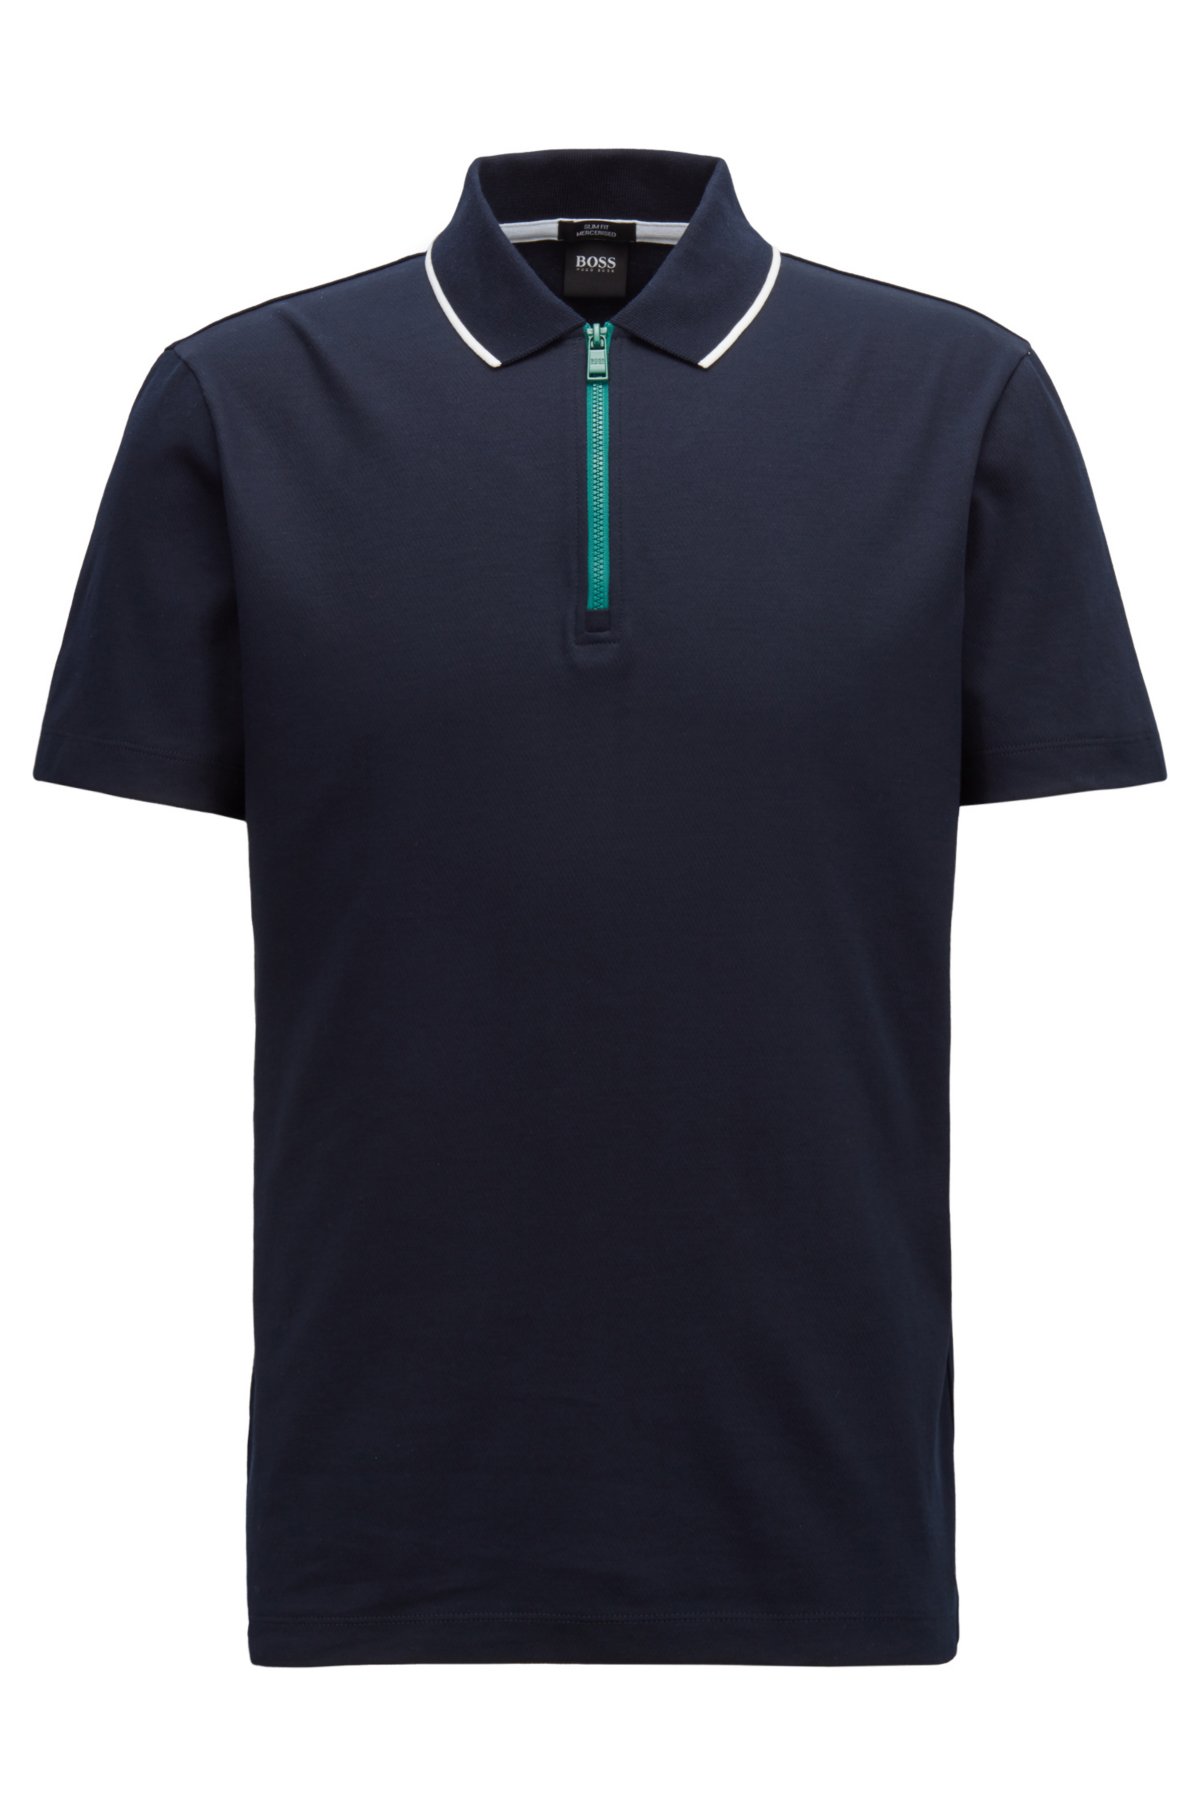 BOSS - Mercerized cotton polo shirt with contrast zip